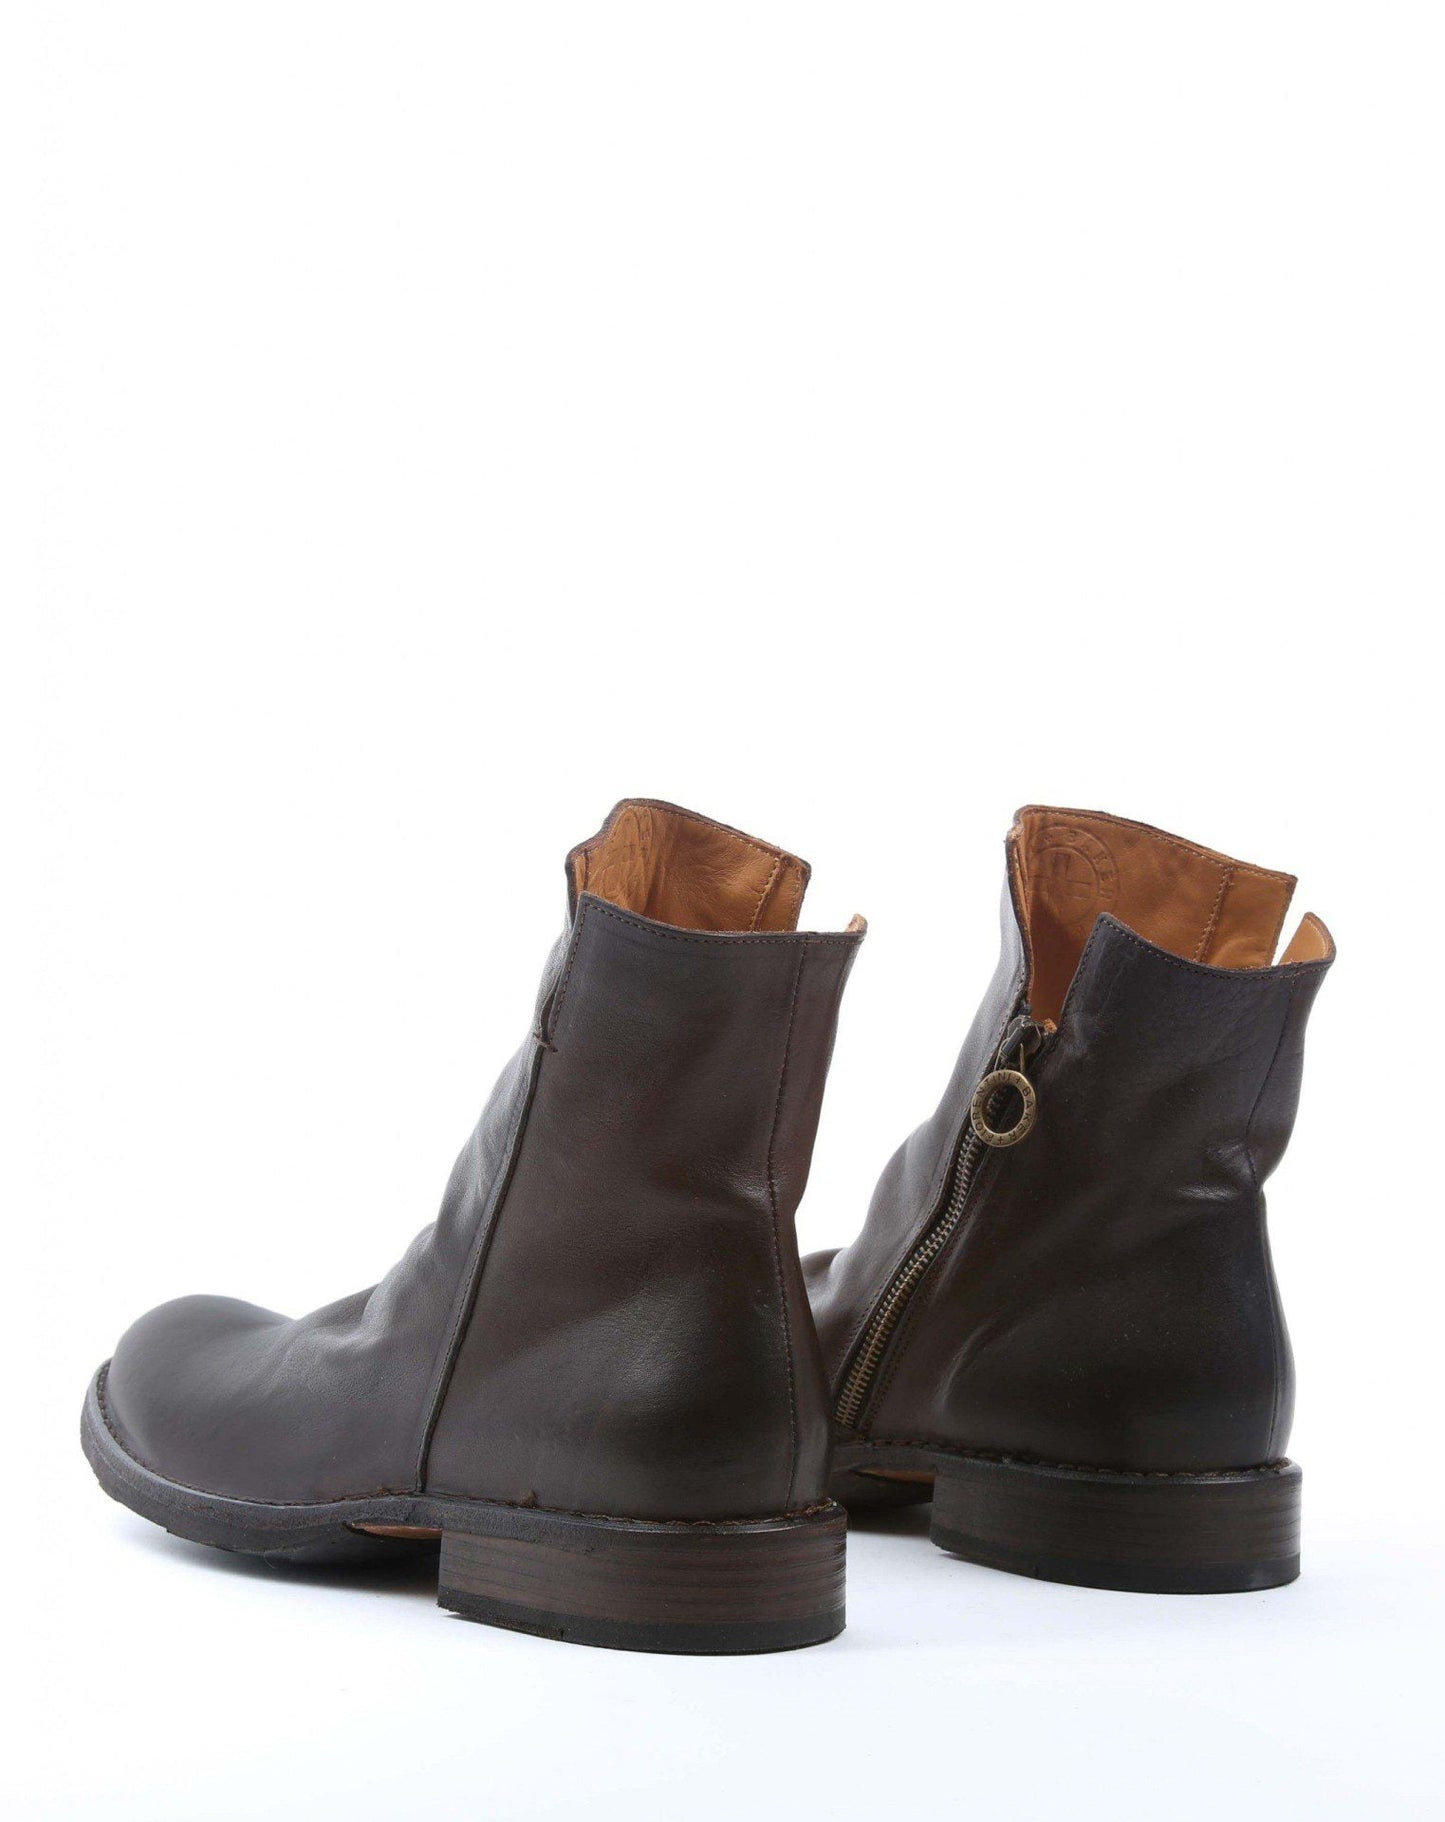 FIORENTINI + BAKER, ETERNITY ELF, Best-selling iconic boot in the FB collection since 2003. Handcrafted with natural leather by skilled artisans. Made in Italy. Made to last.